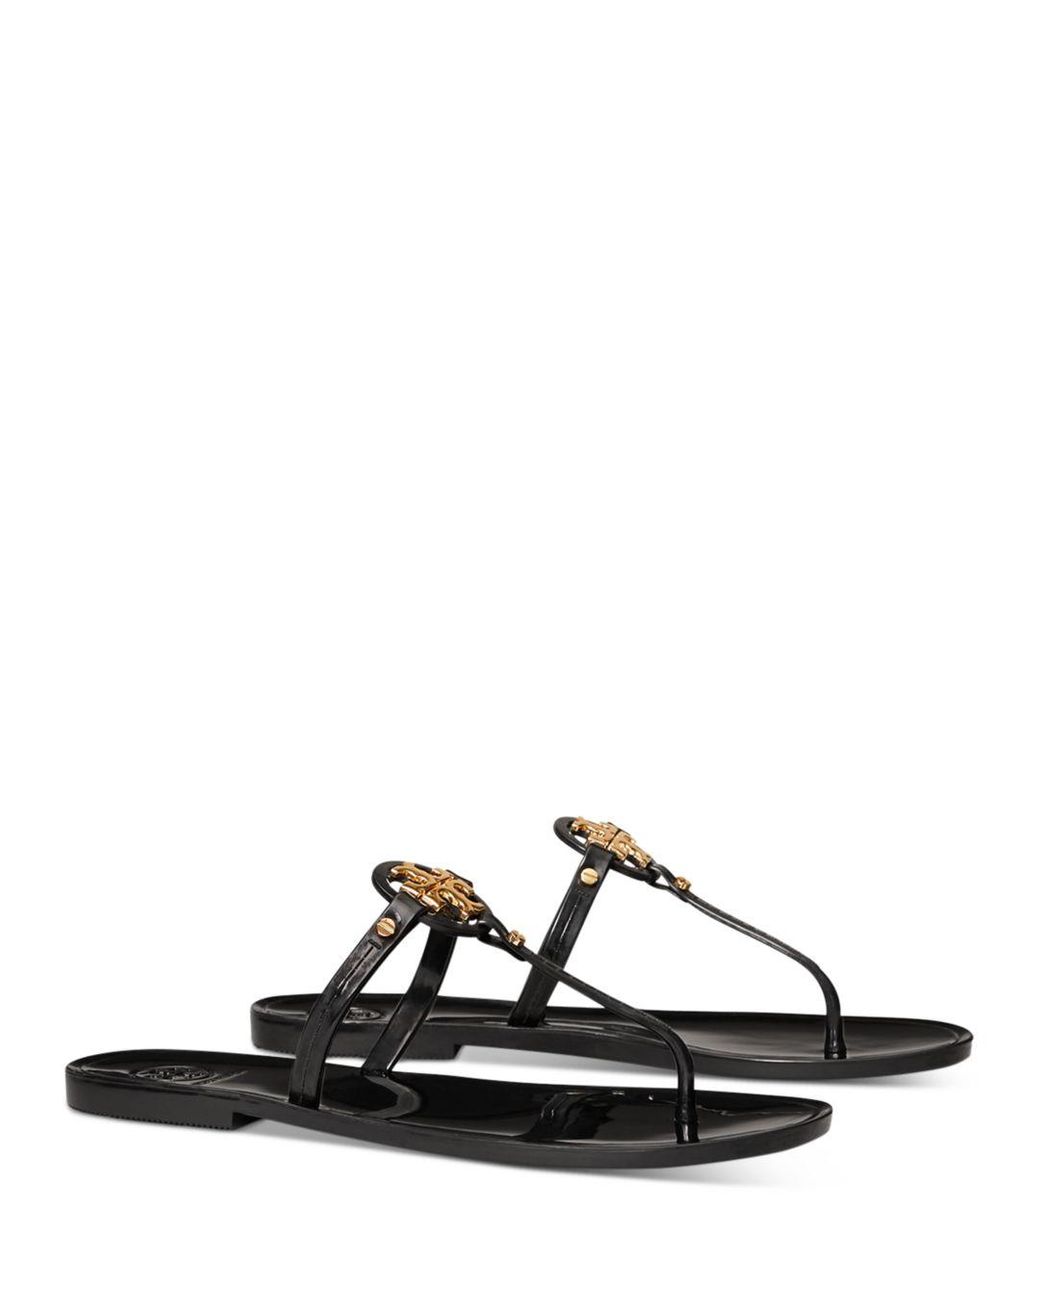 Tory Burch Mini Miller Jelly Thong Sandal in Black Leather (Black 